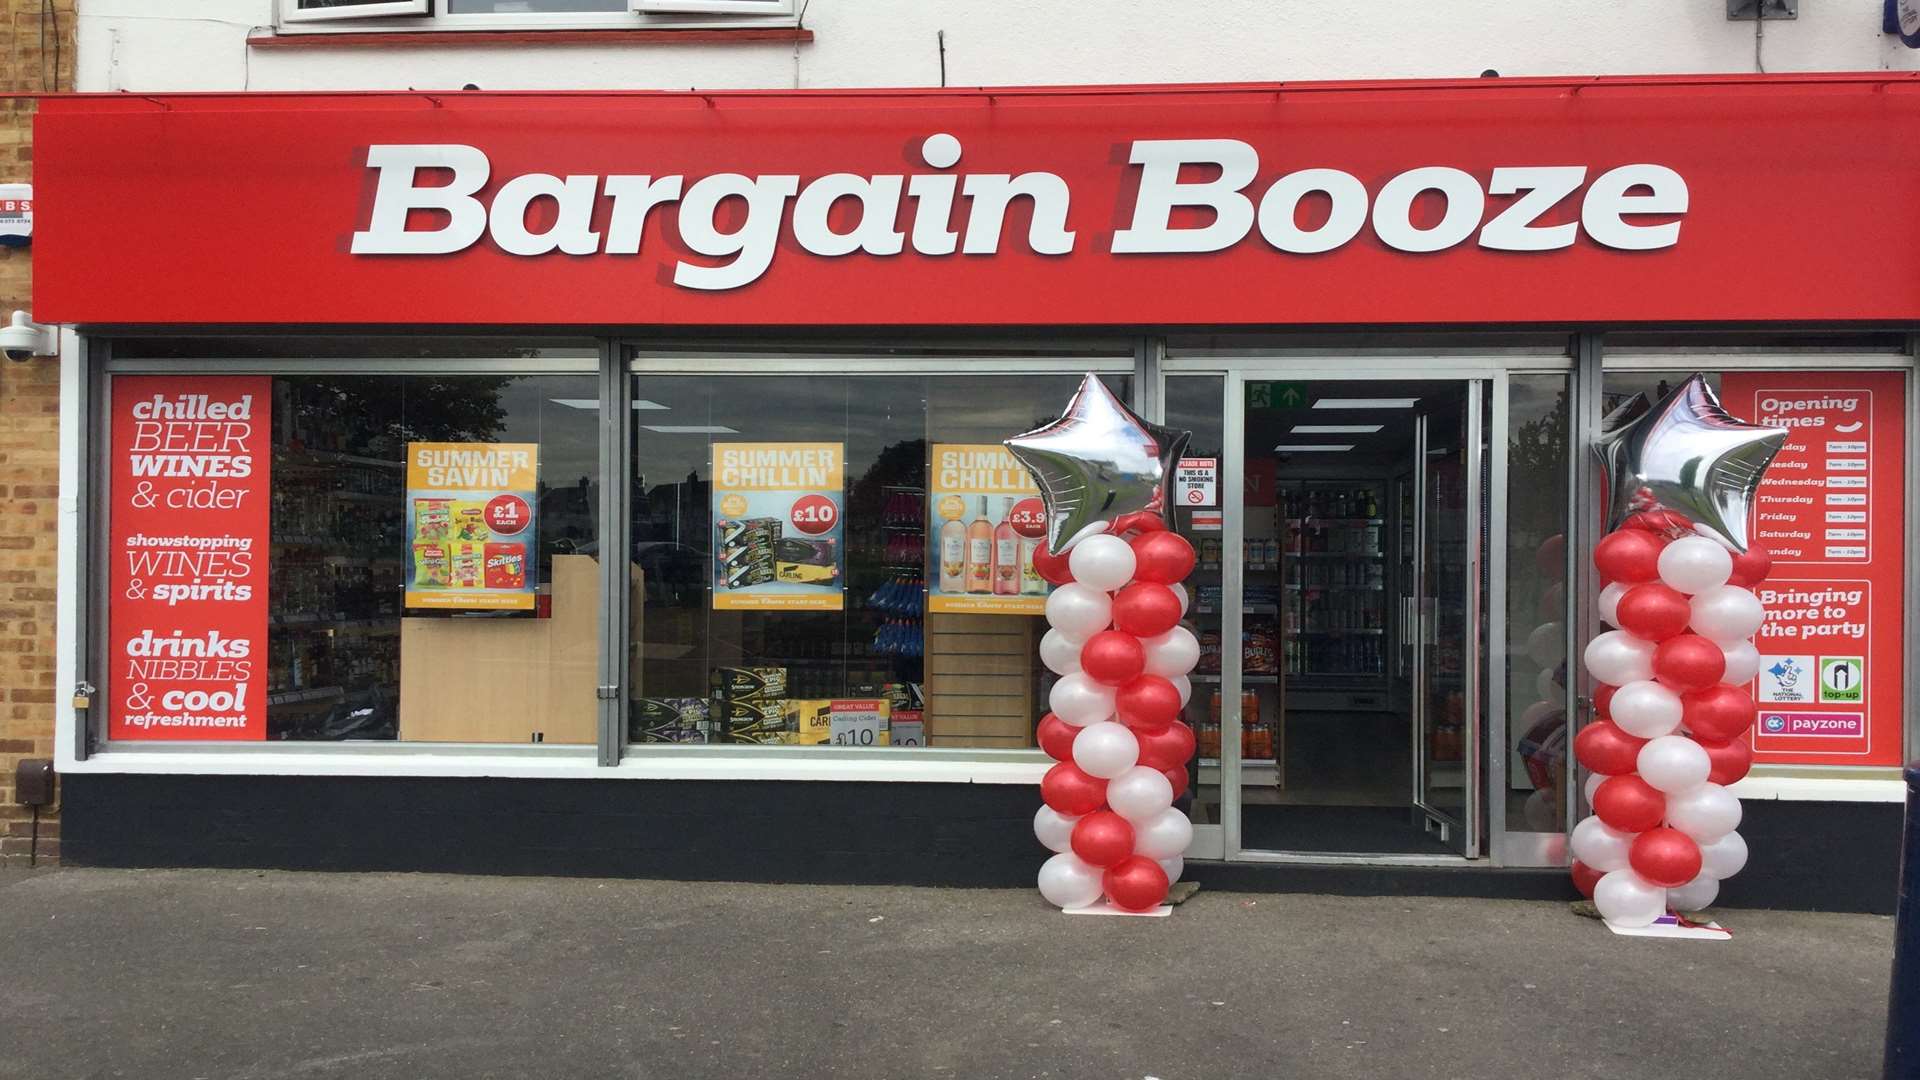 Bargain Booze has opened a franchise in Maidstone